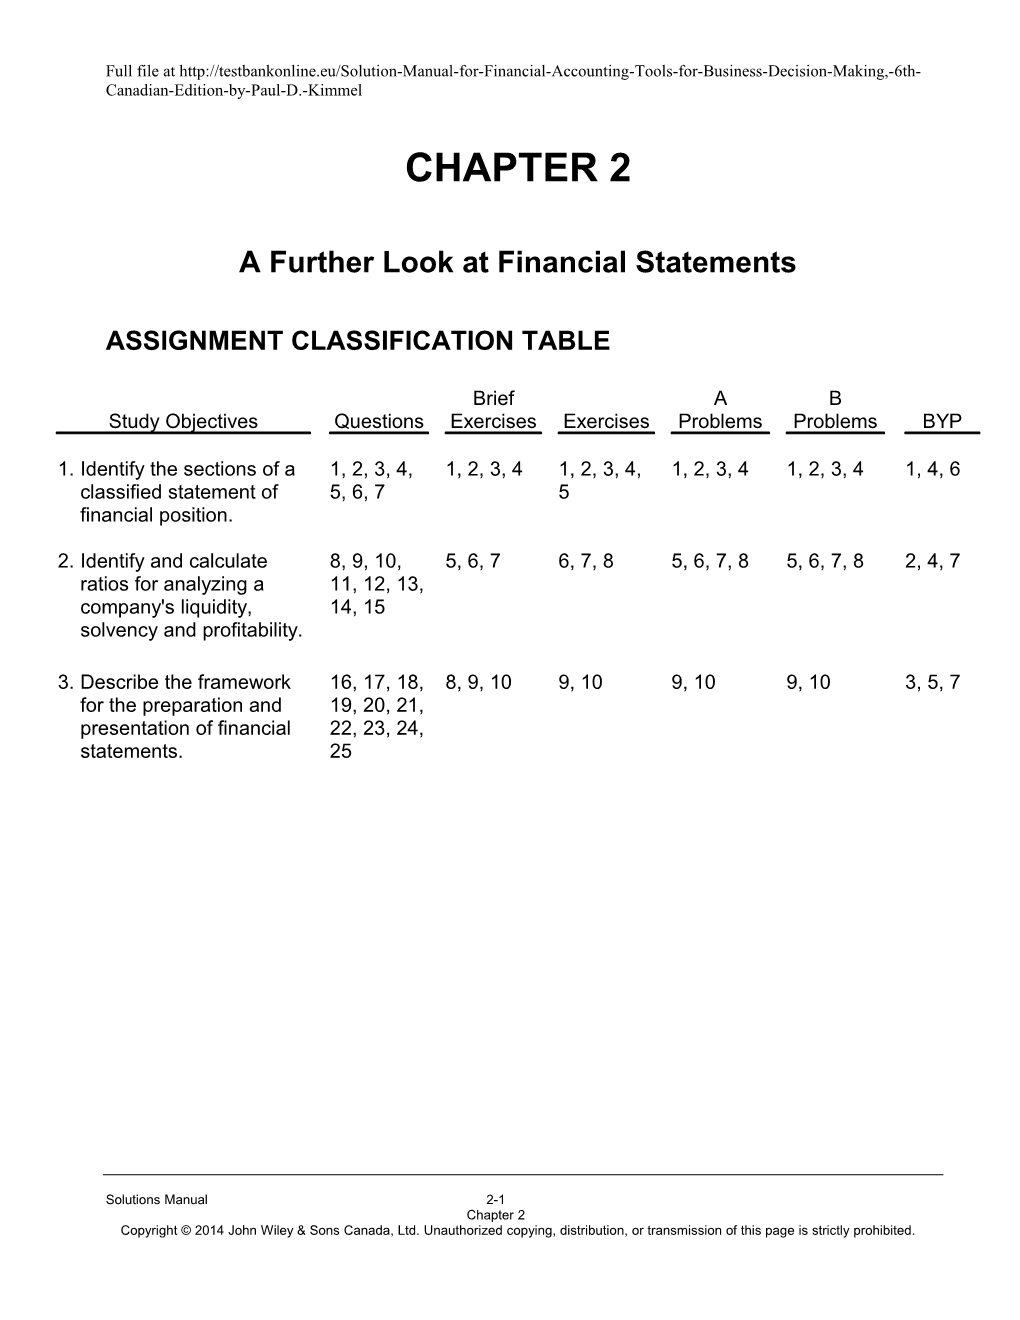 Chapter 2: a Further Look at Financial Statements